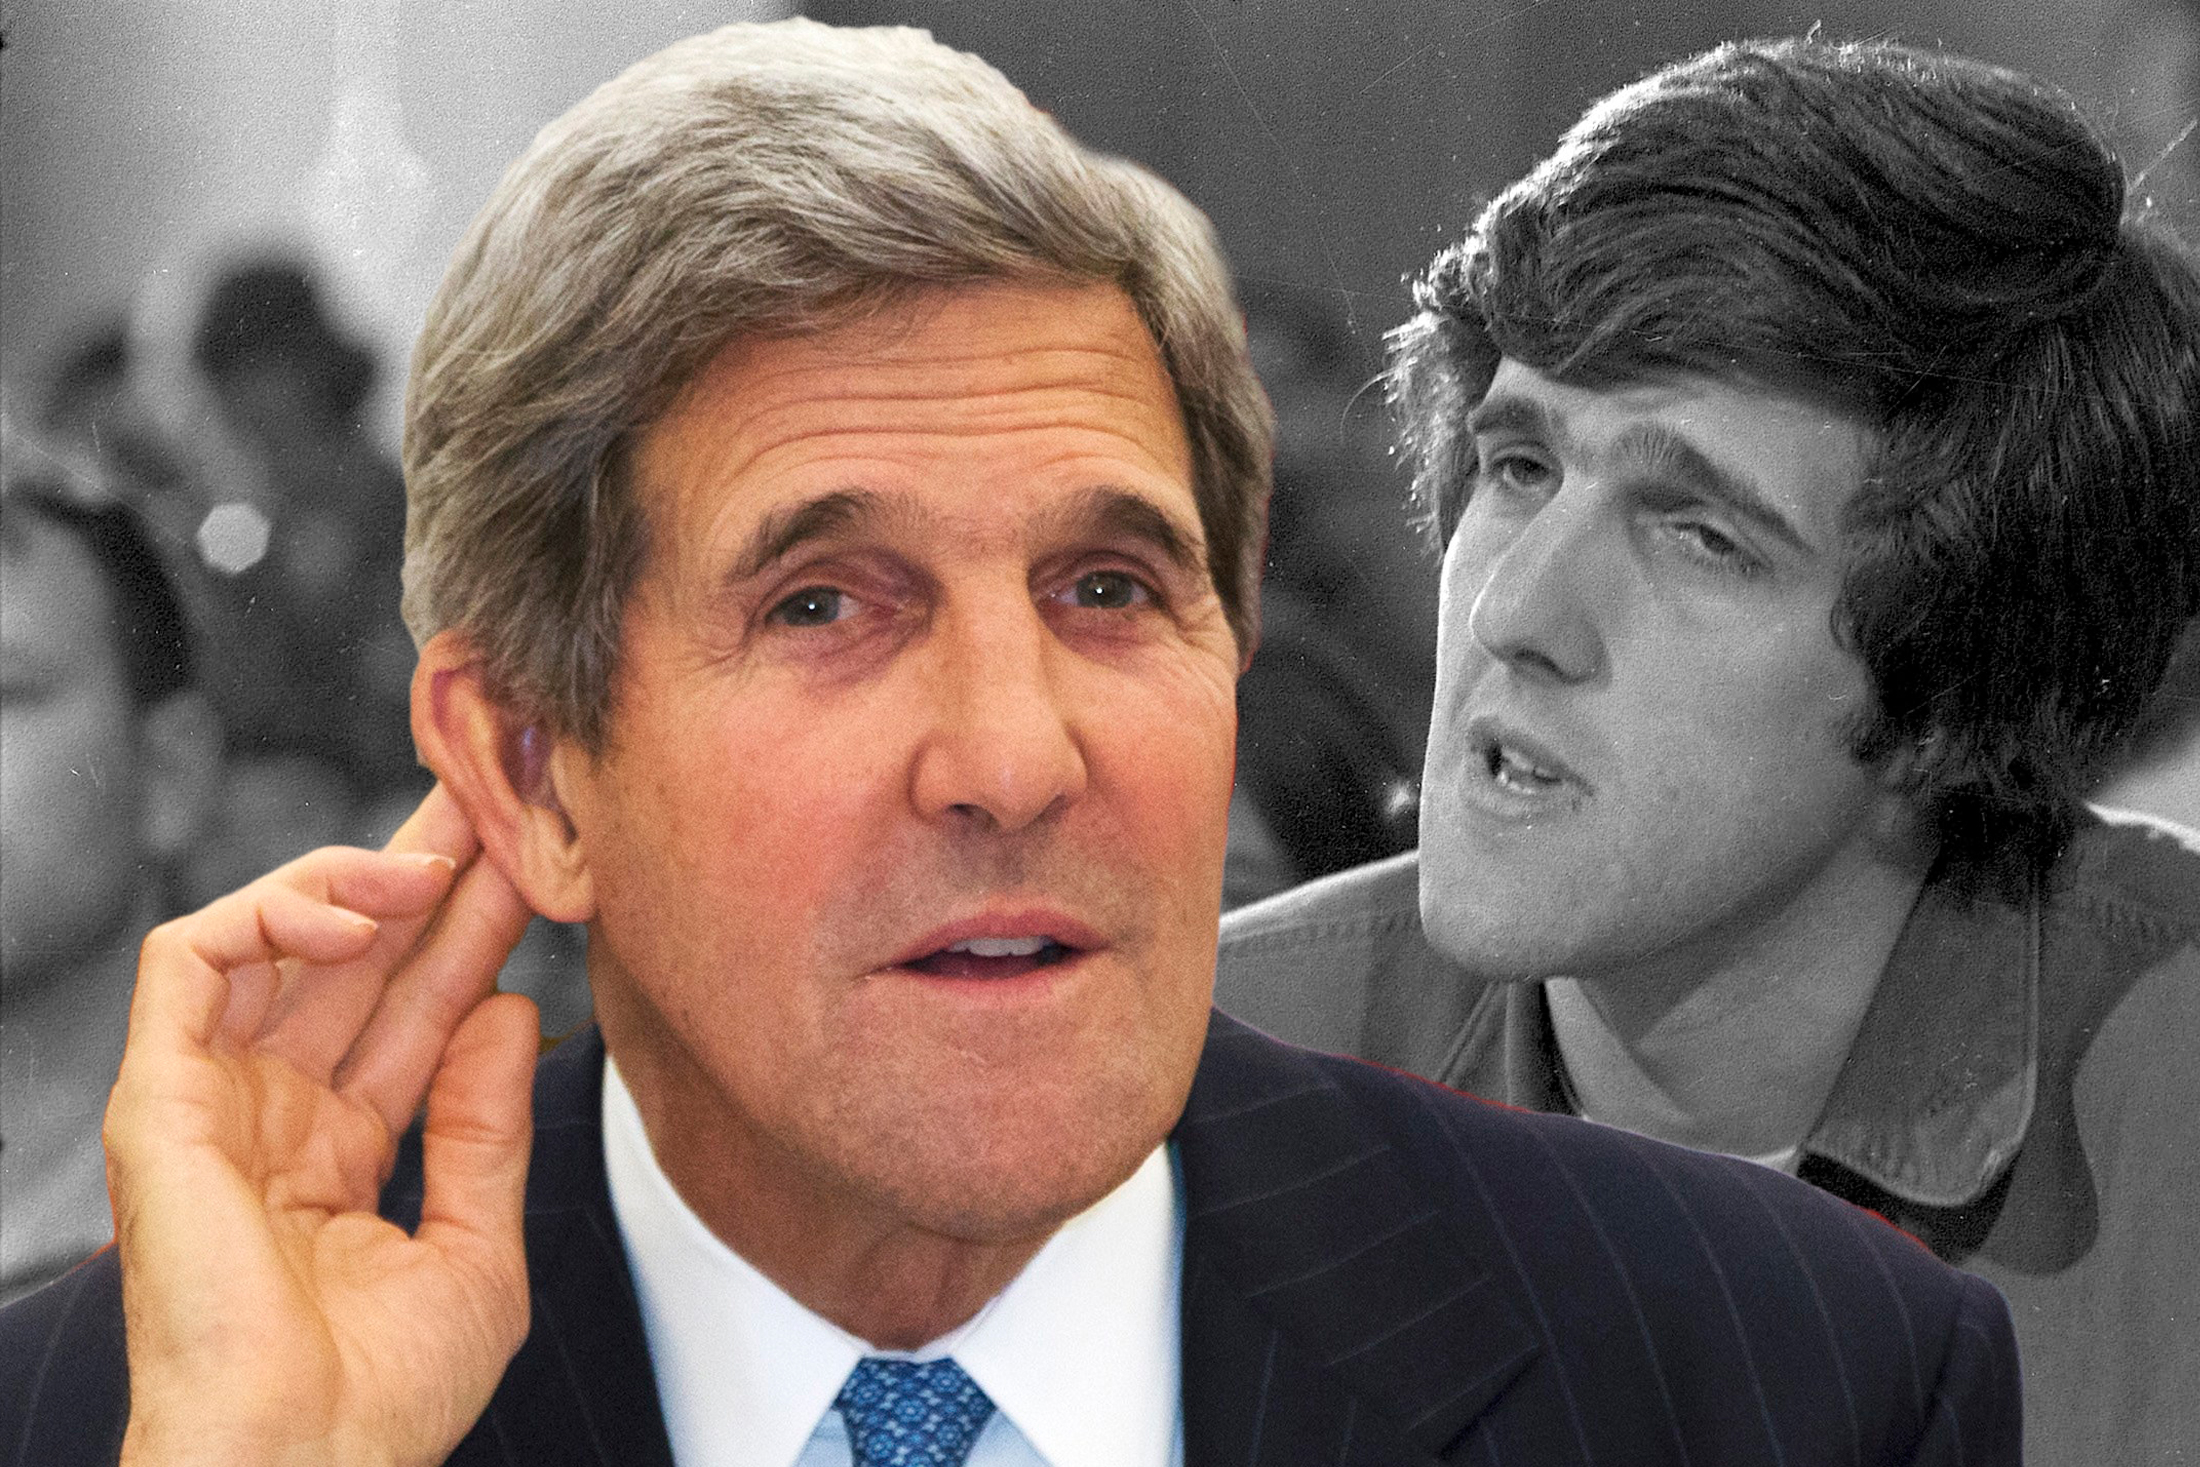 Old and New - John Kerry slams “new isolationism” and says U.S. behaving like poor nation